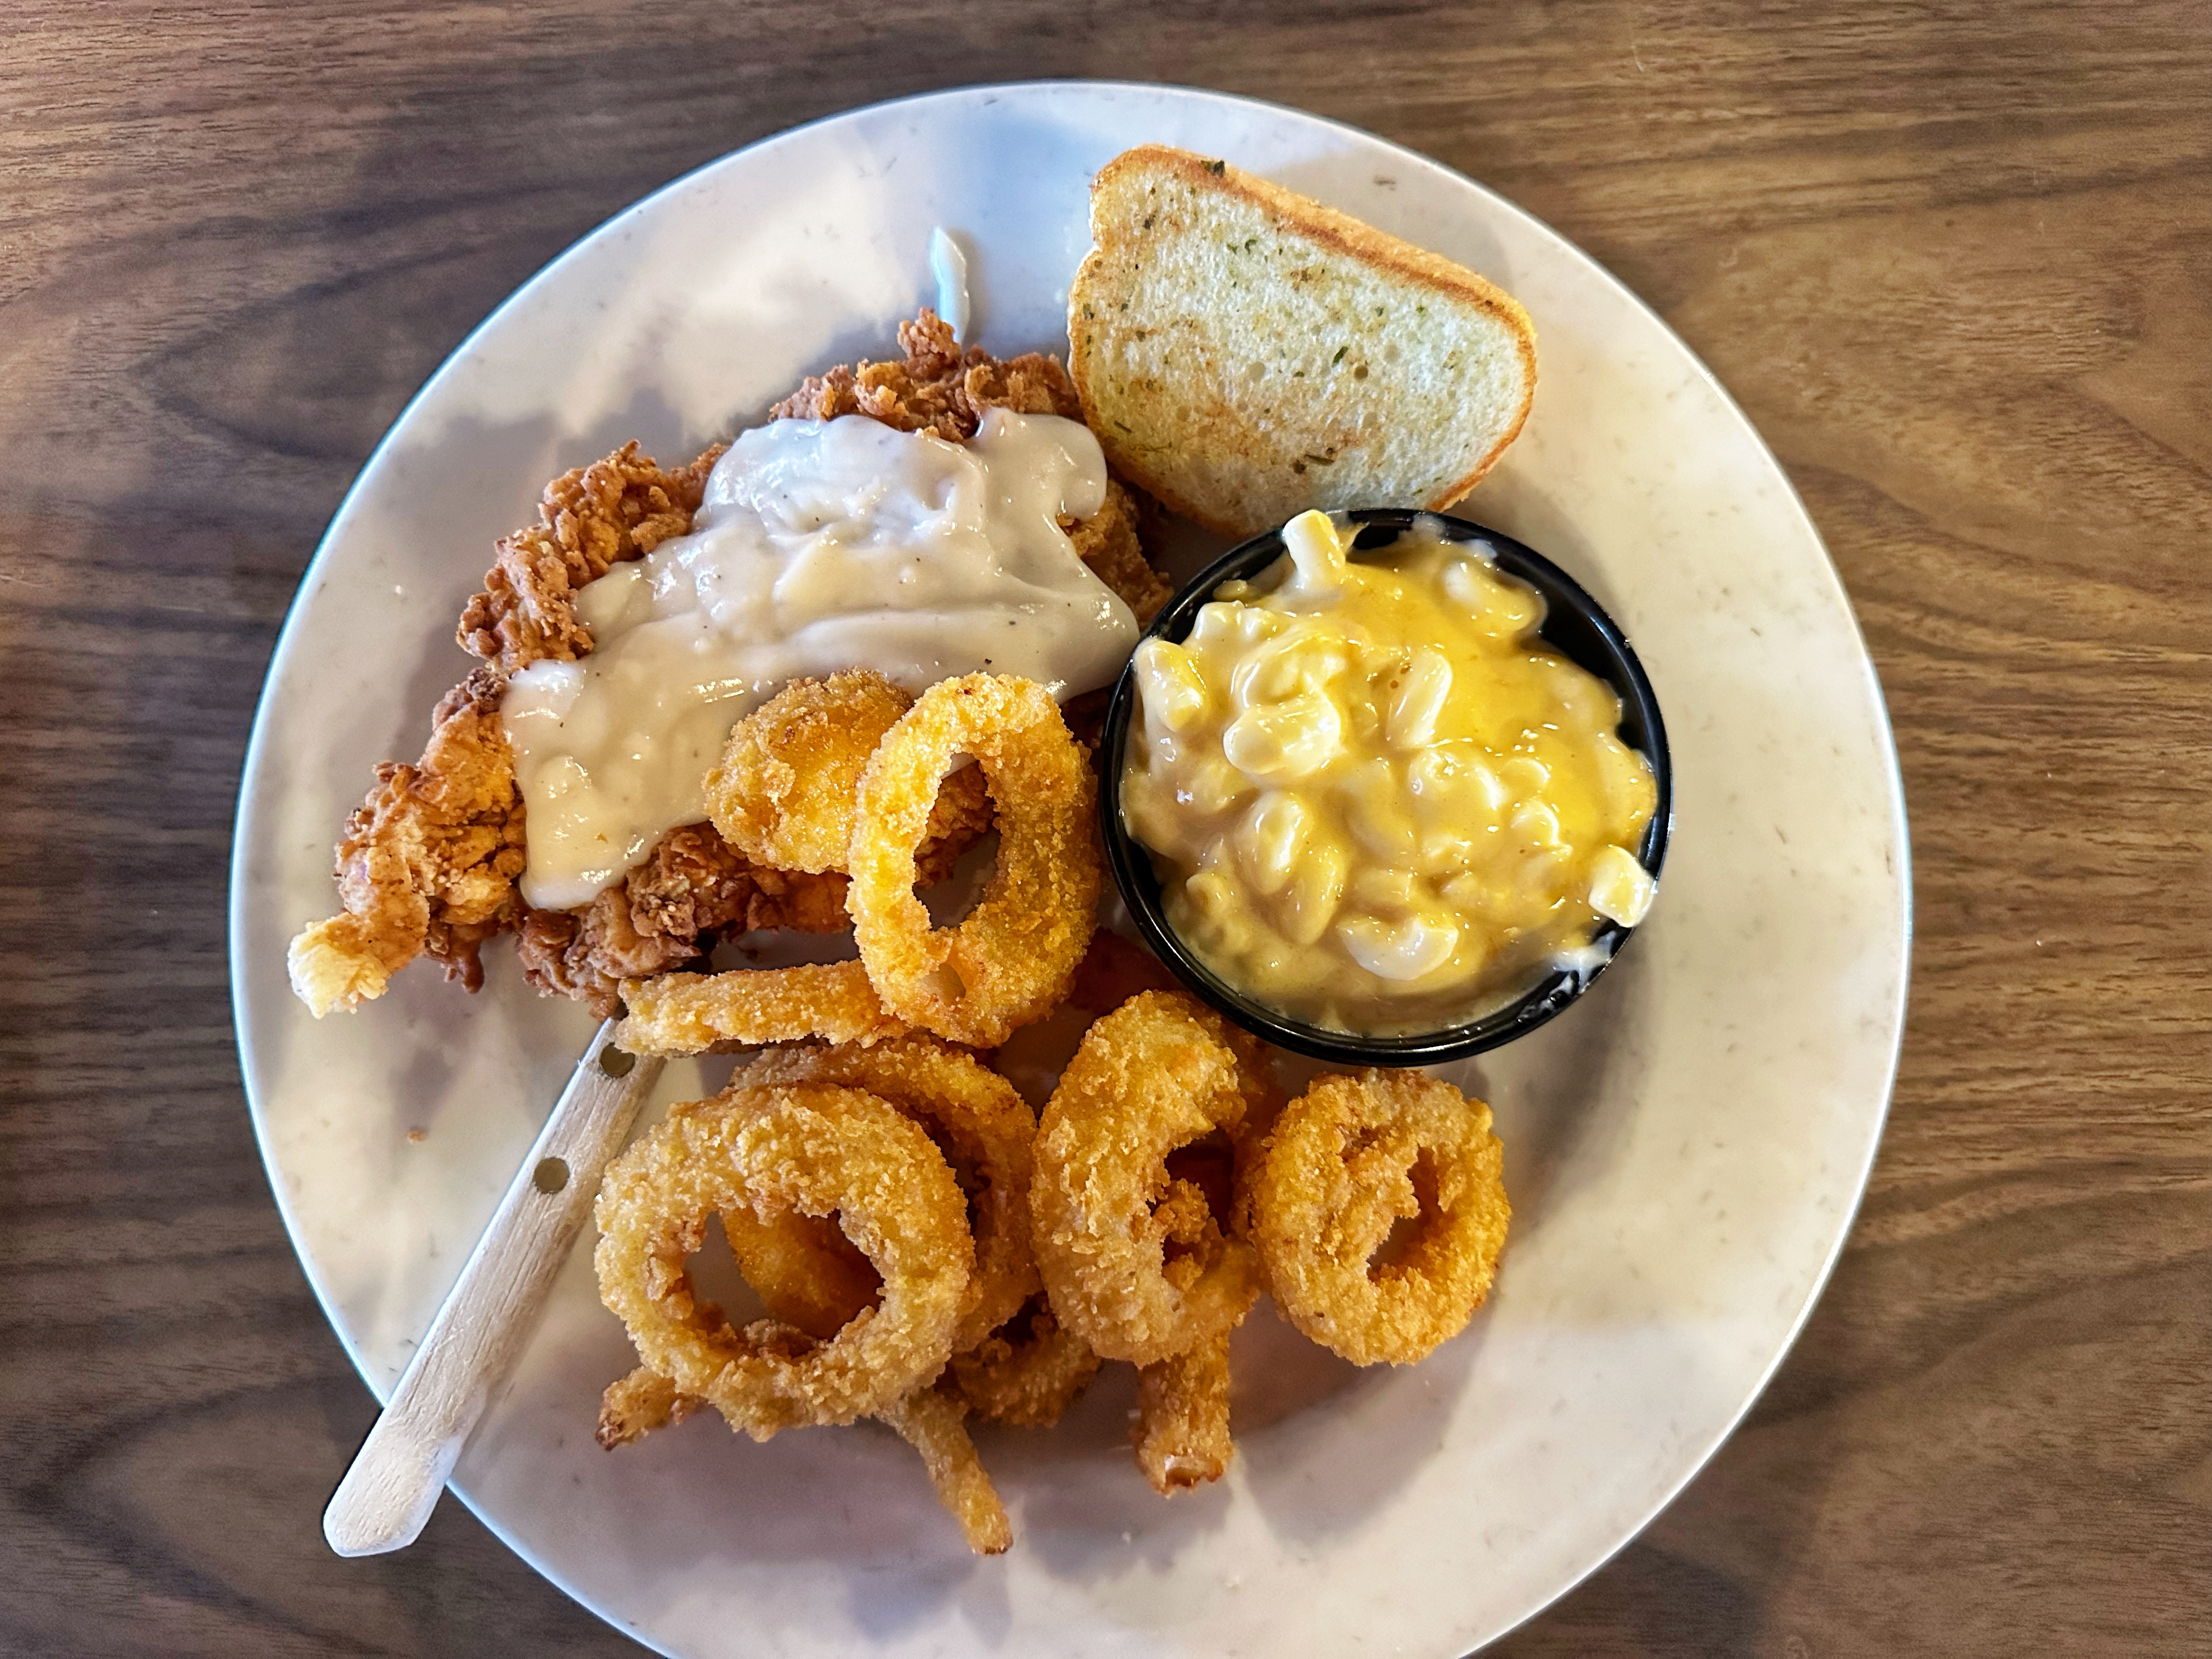 chicken fried chicken, onion rings, mac & cheese, and garlic bread at Horseshoe Grill, Eureka Springs, AR